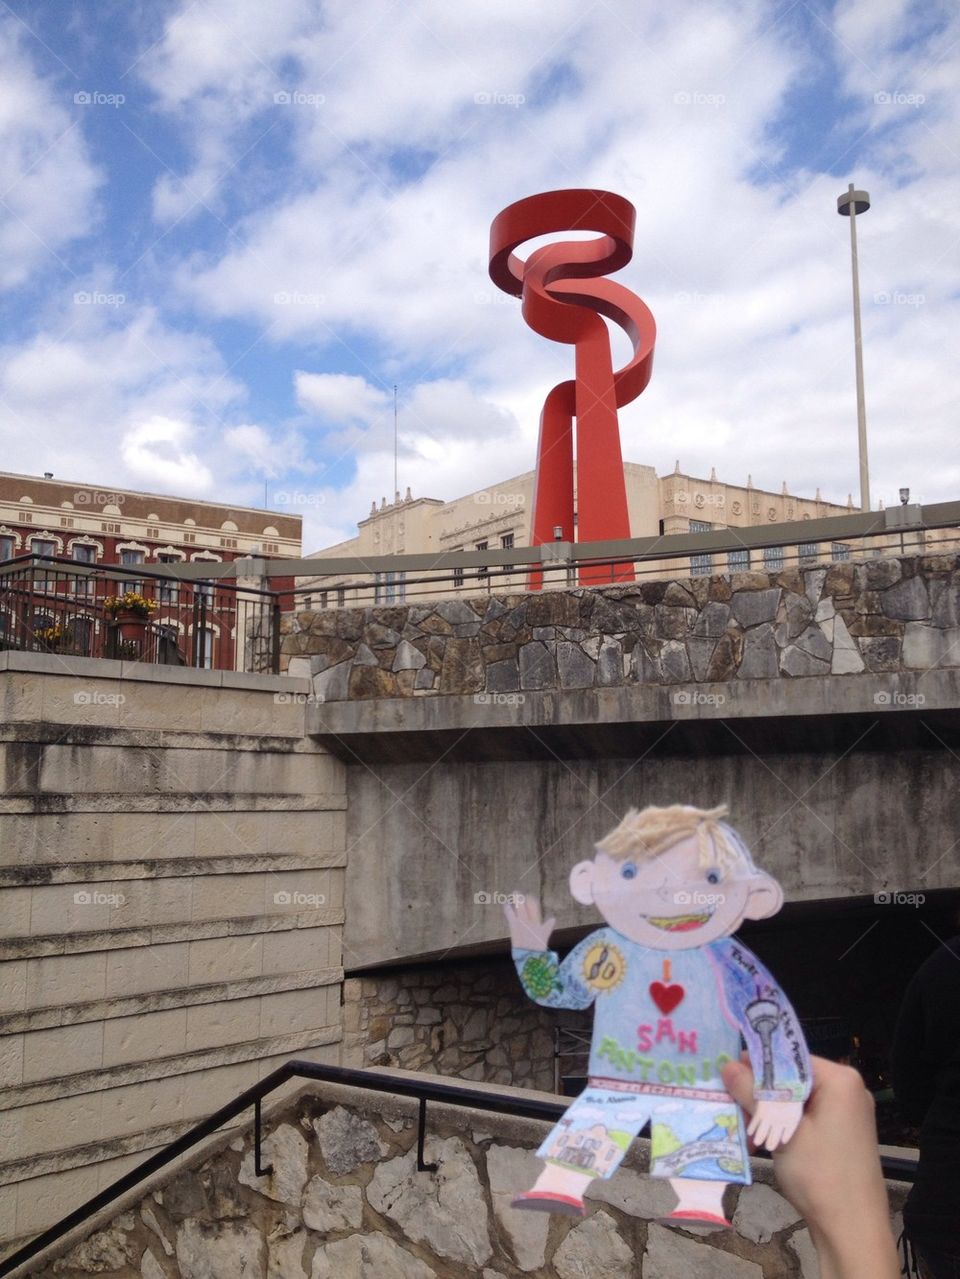 Flat Stanley at the River Walk 